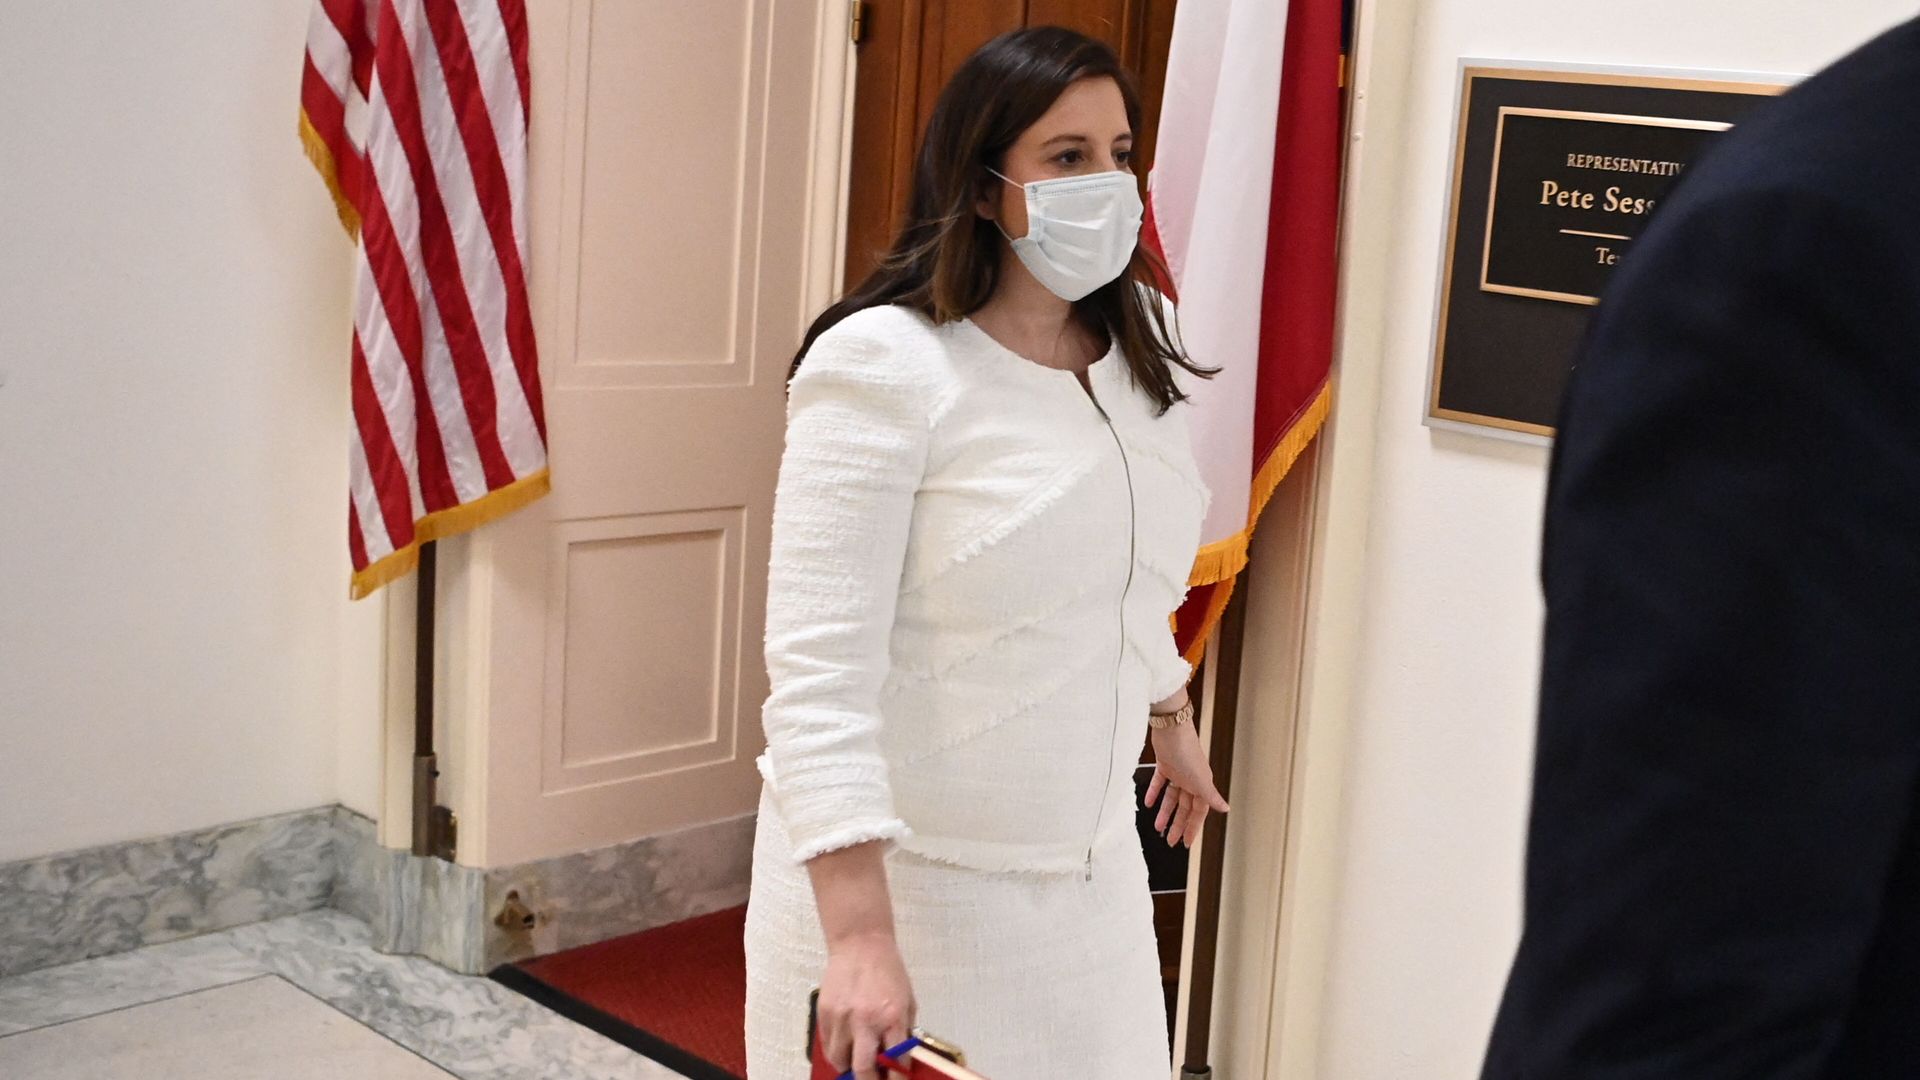 Elise Stefanik walks down a hallway while wearing a mask, with an American flag behind her.